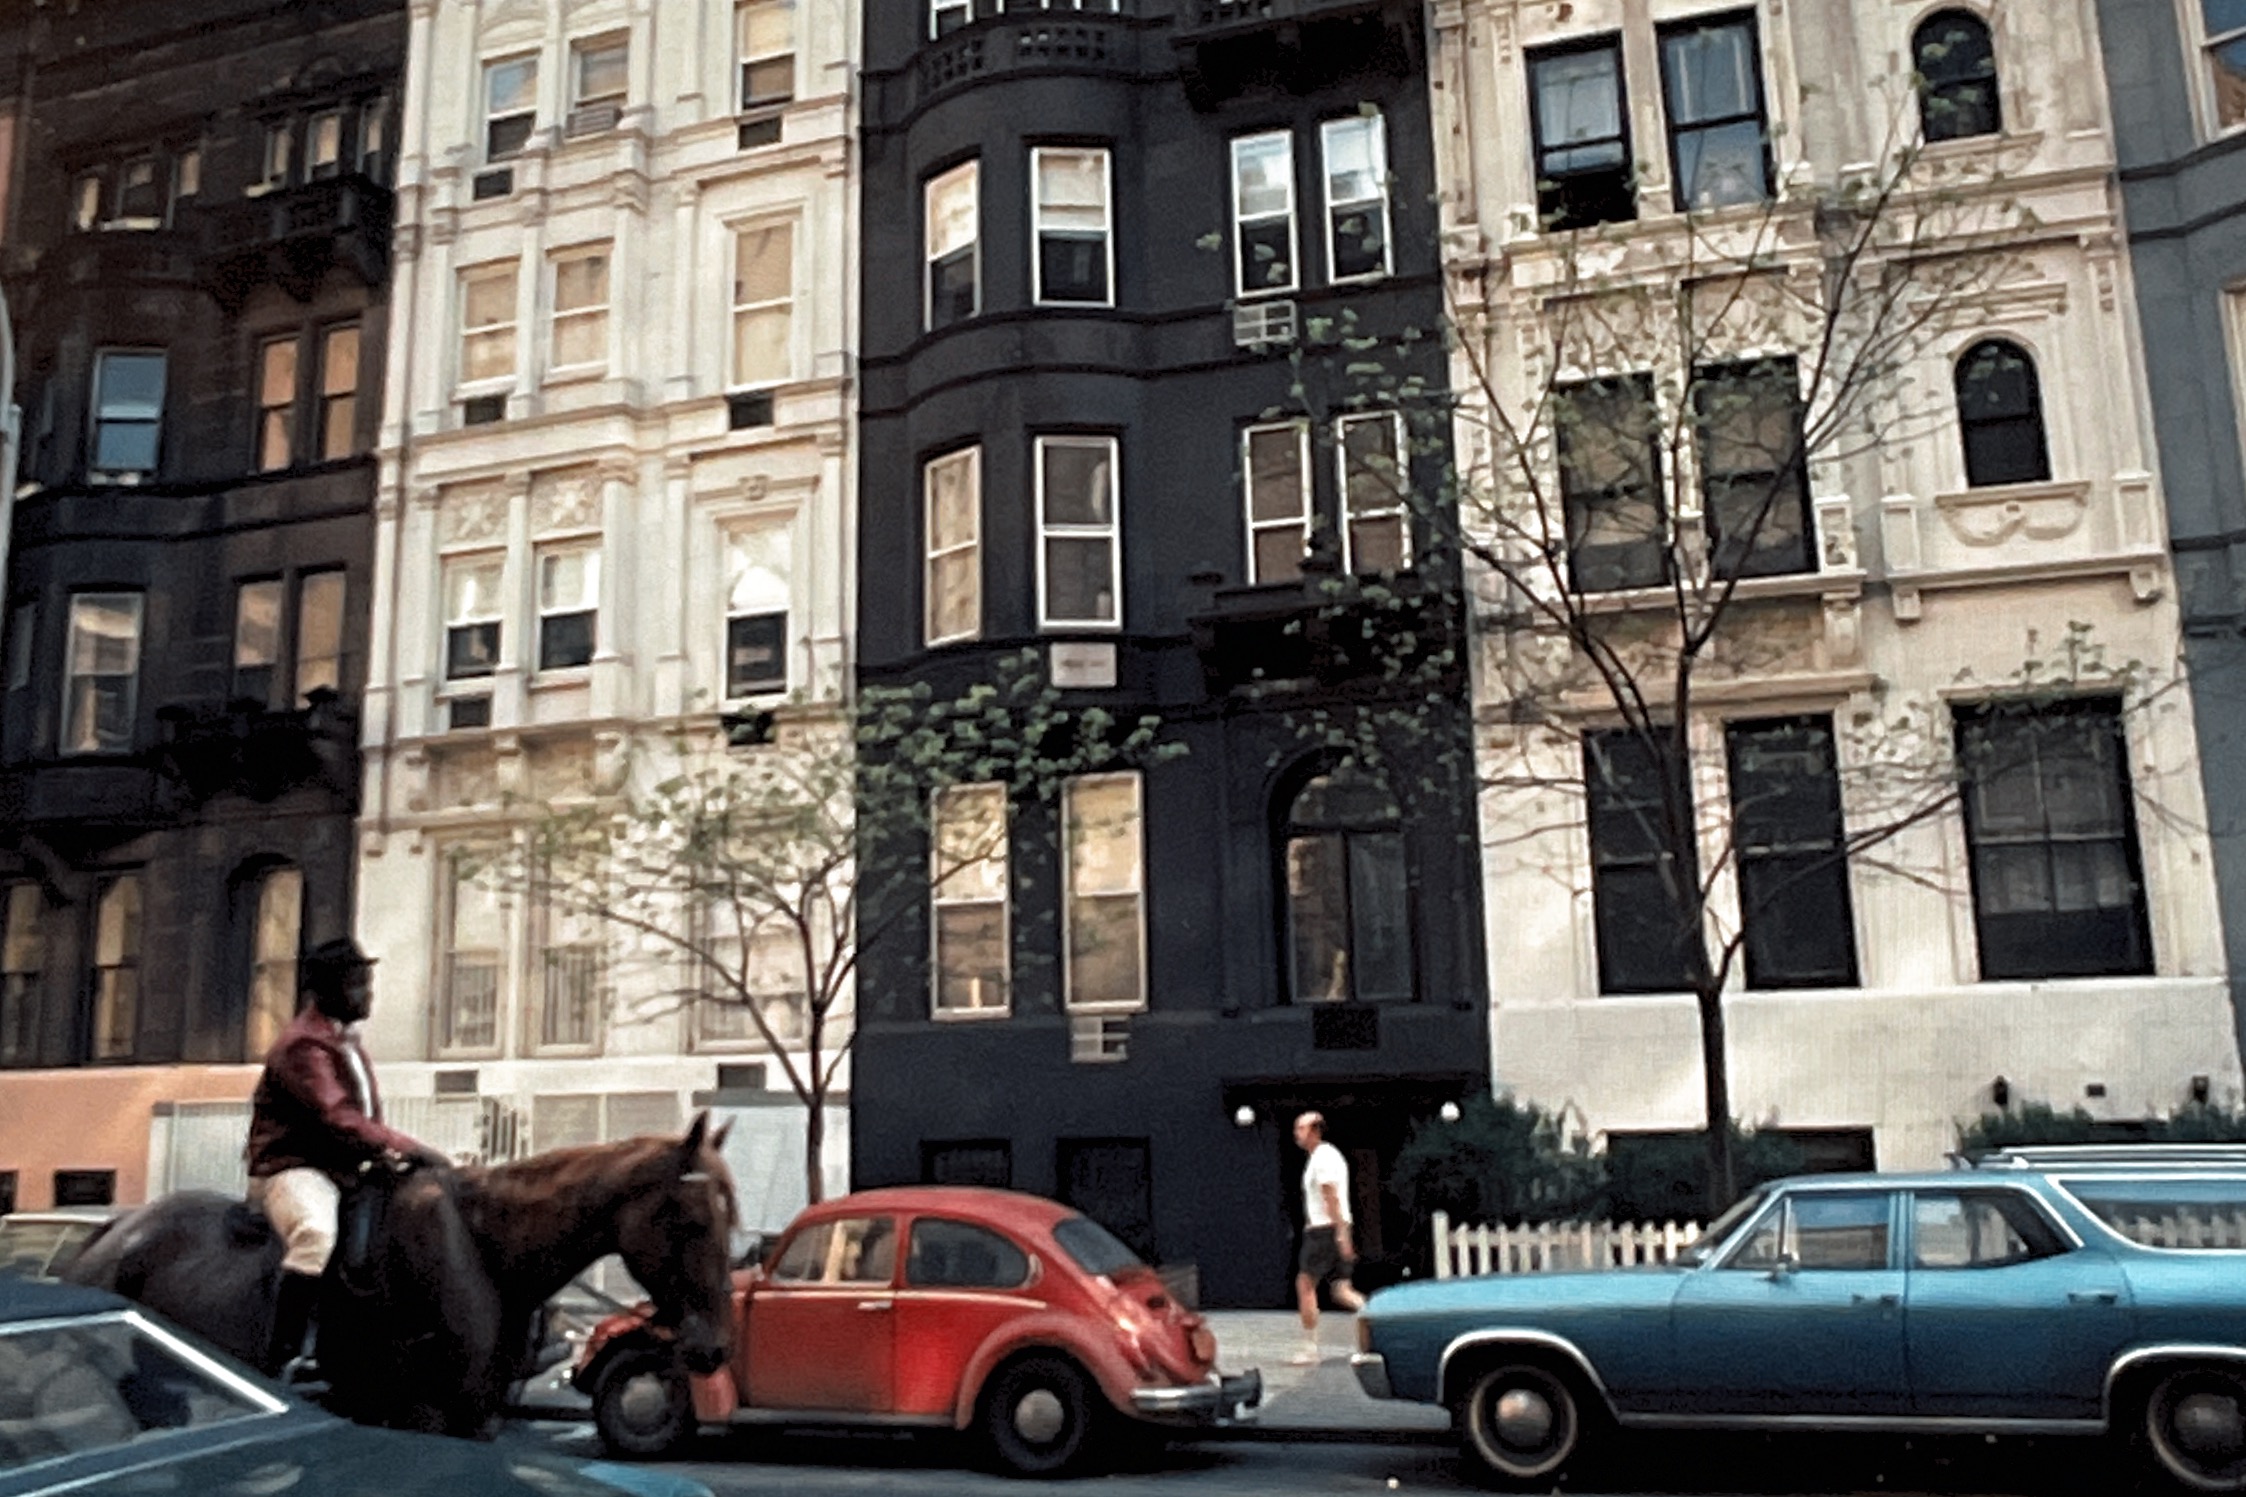 In the 1970s on 90th St, New York City’s West Side